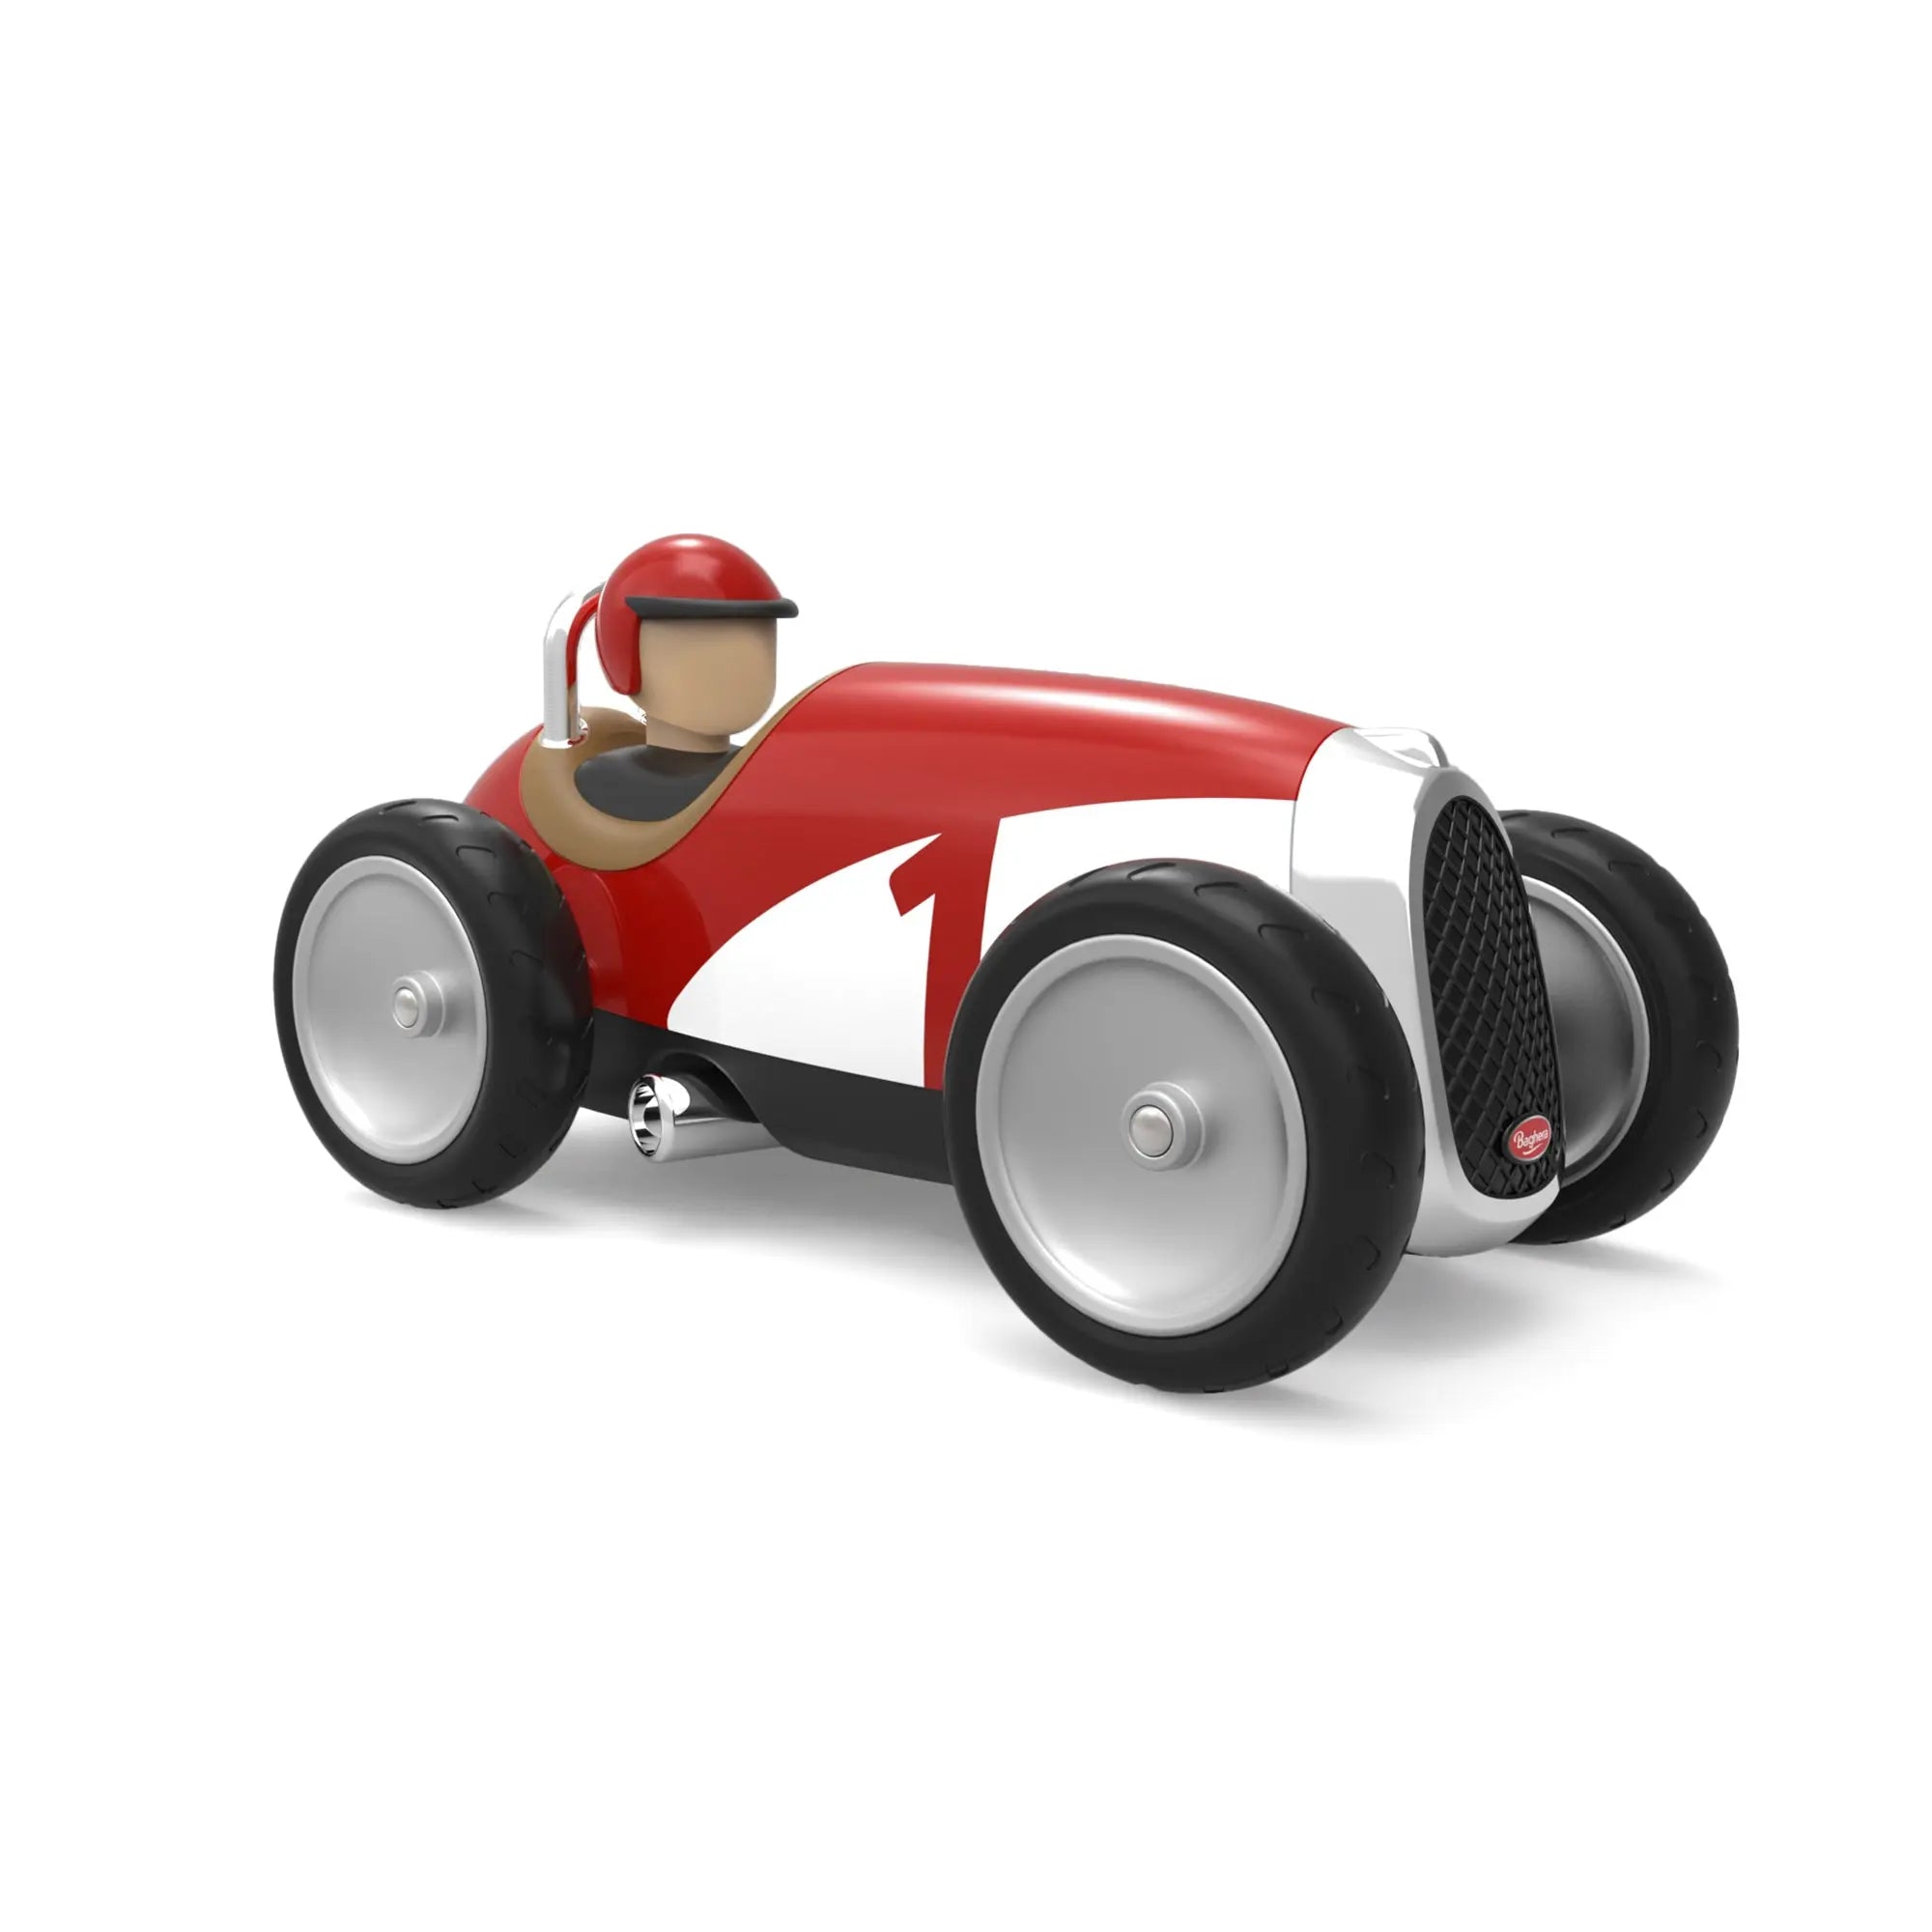 Vintage Car Racing Car Toy, Durable Plastic Model, Racing Car Toy, Playful Gift for Kids, Toy Car Gift  Baghera   